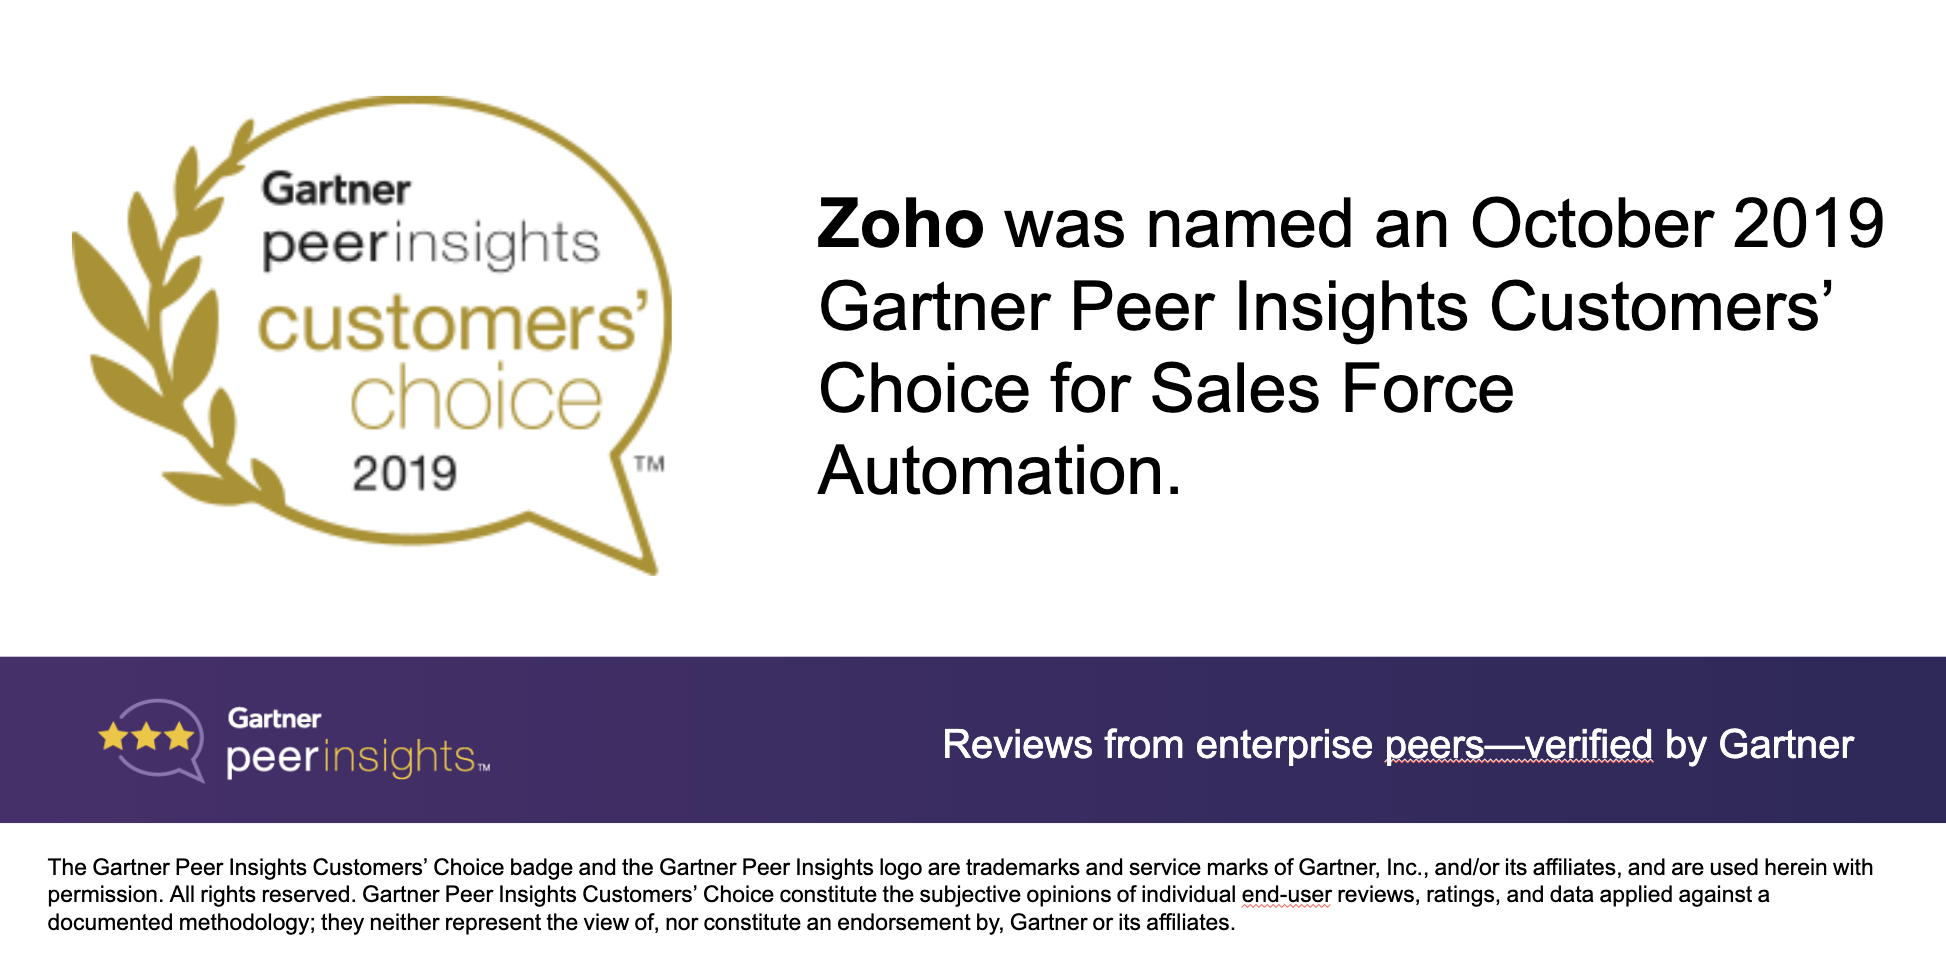 Zoho CRM named an October 2019 Gartner Peer Insights Customers' Choice for Sales Force Automation